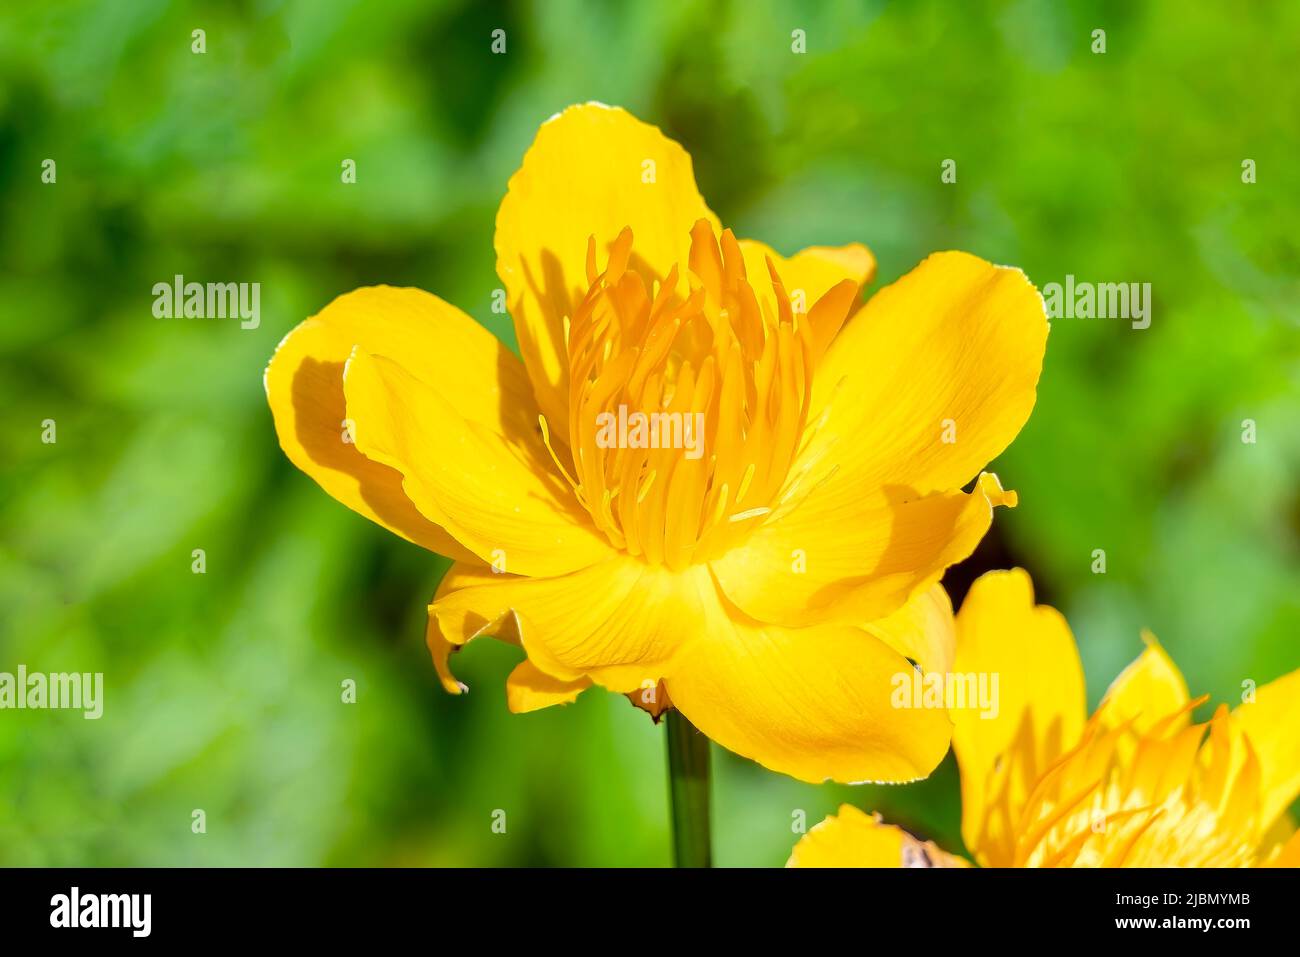 Trollius Chinensis 'Golden Queen' a spring summer flowering plant with a yellow summertime flower commonly known as Globeflower, stock photo image Stock Photo